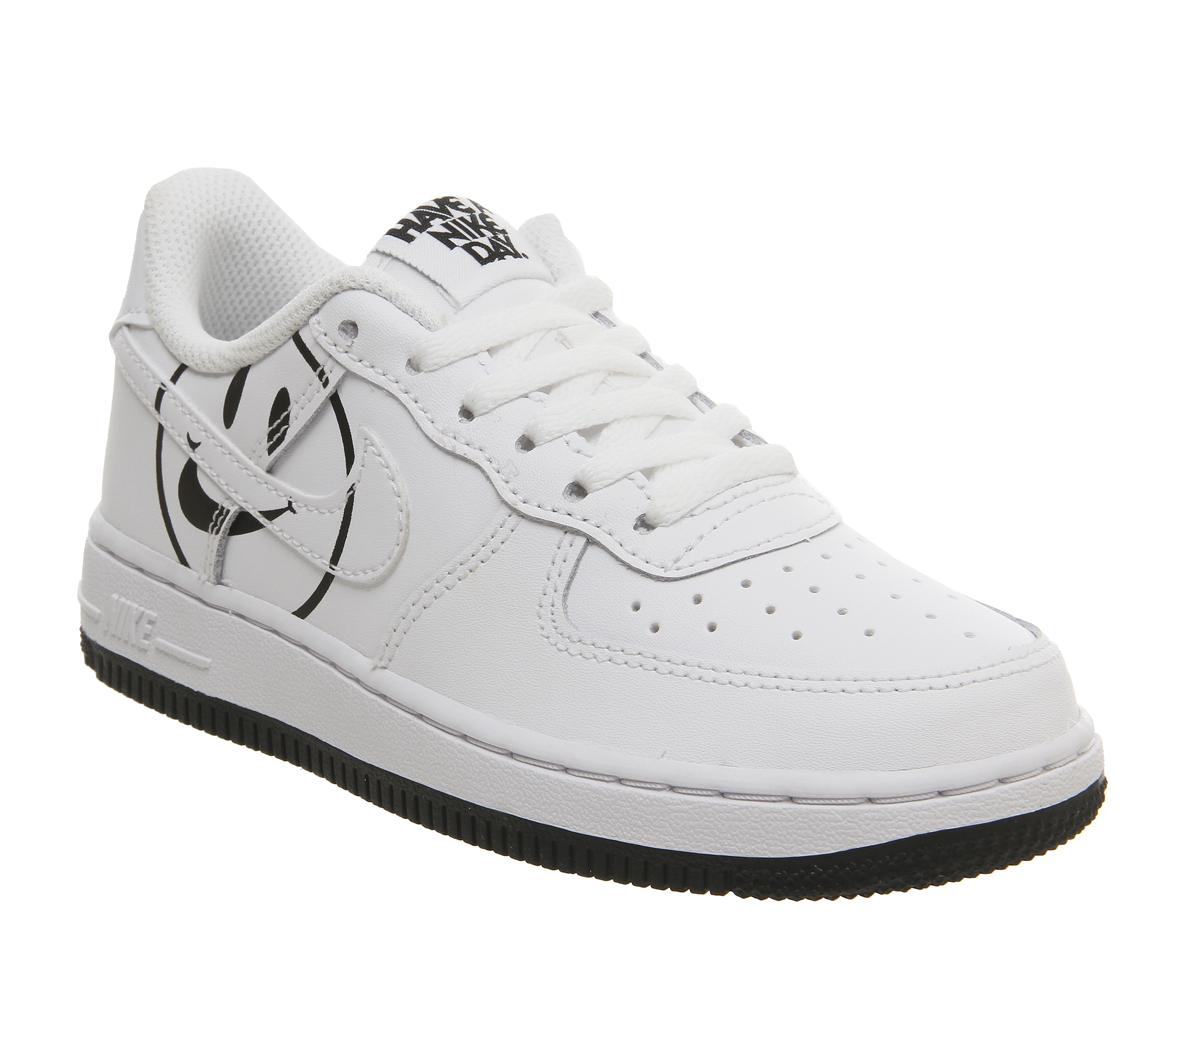 NikeAir Force 1 Lv8 Ps TrainersWhite Black Smile